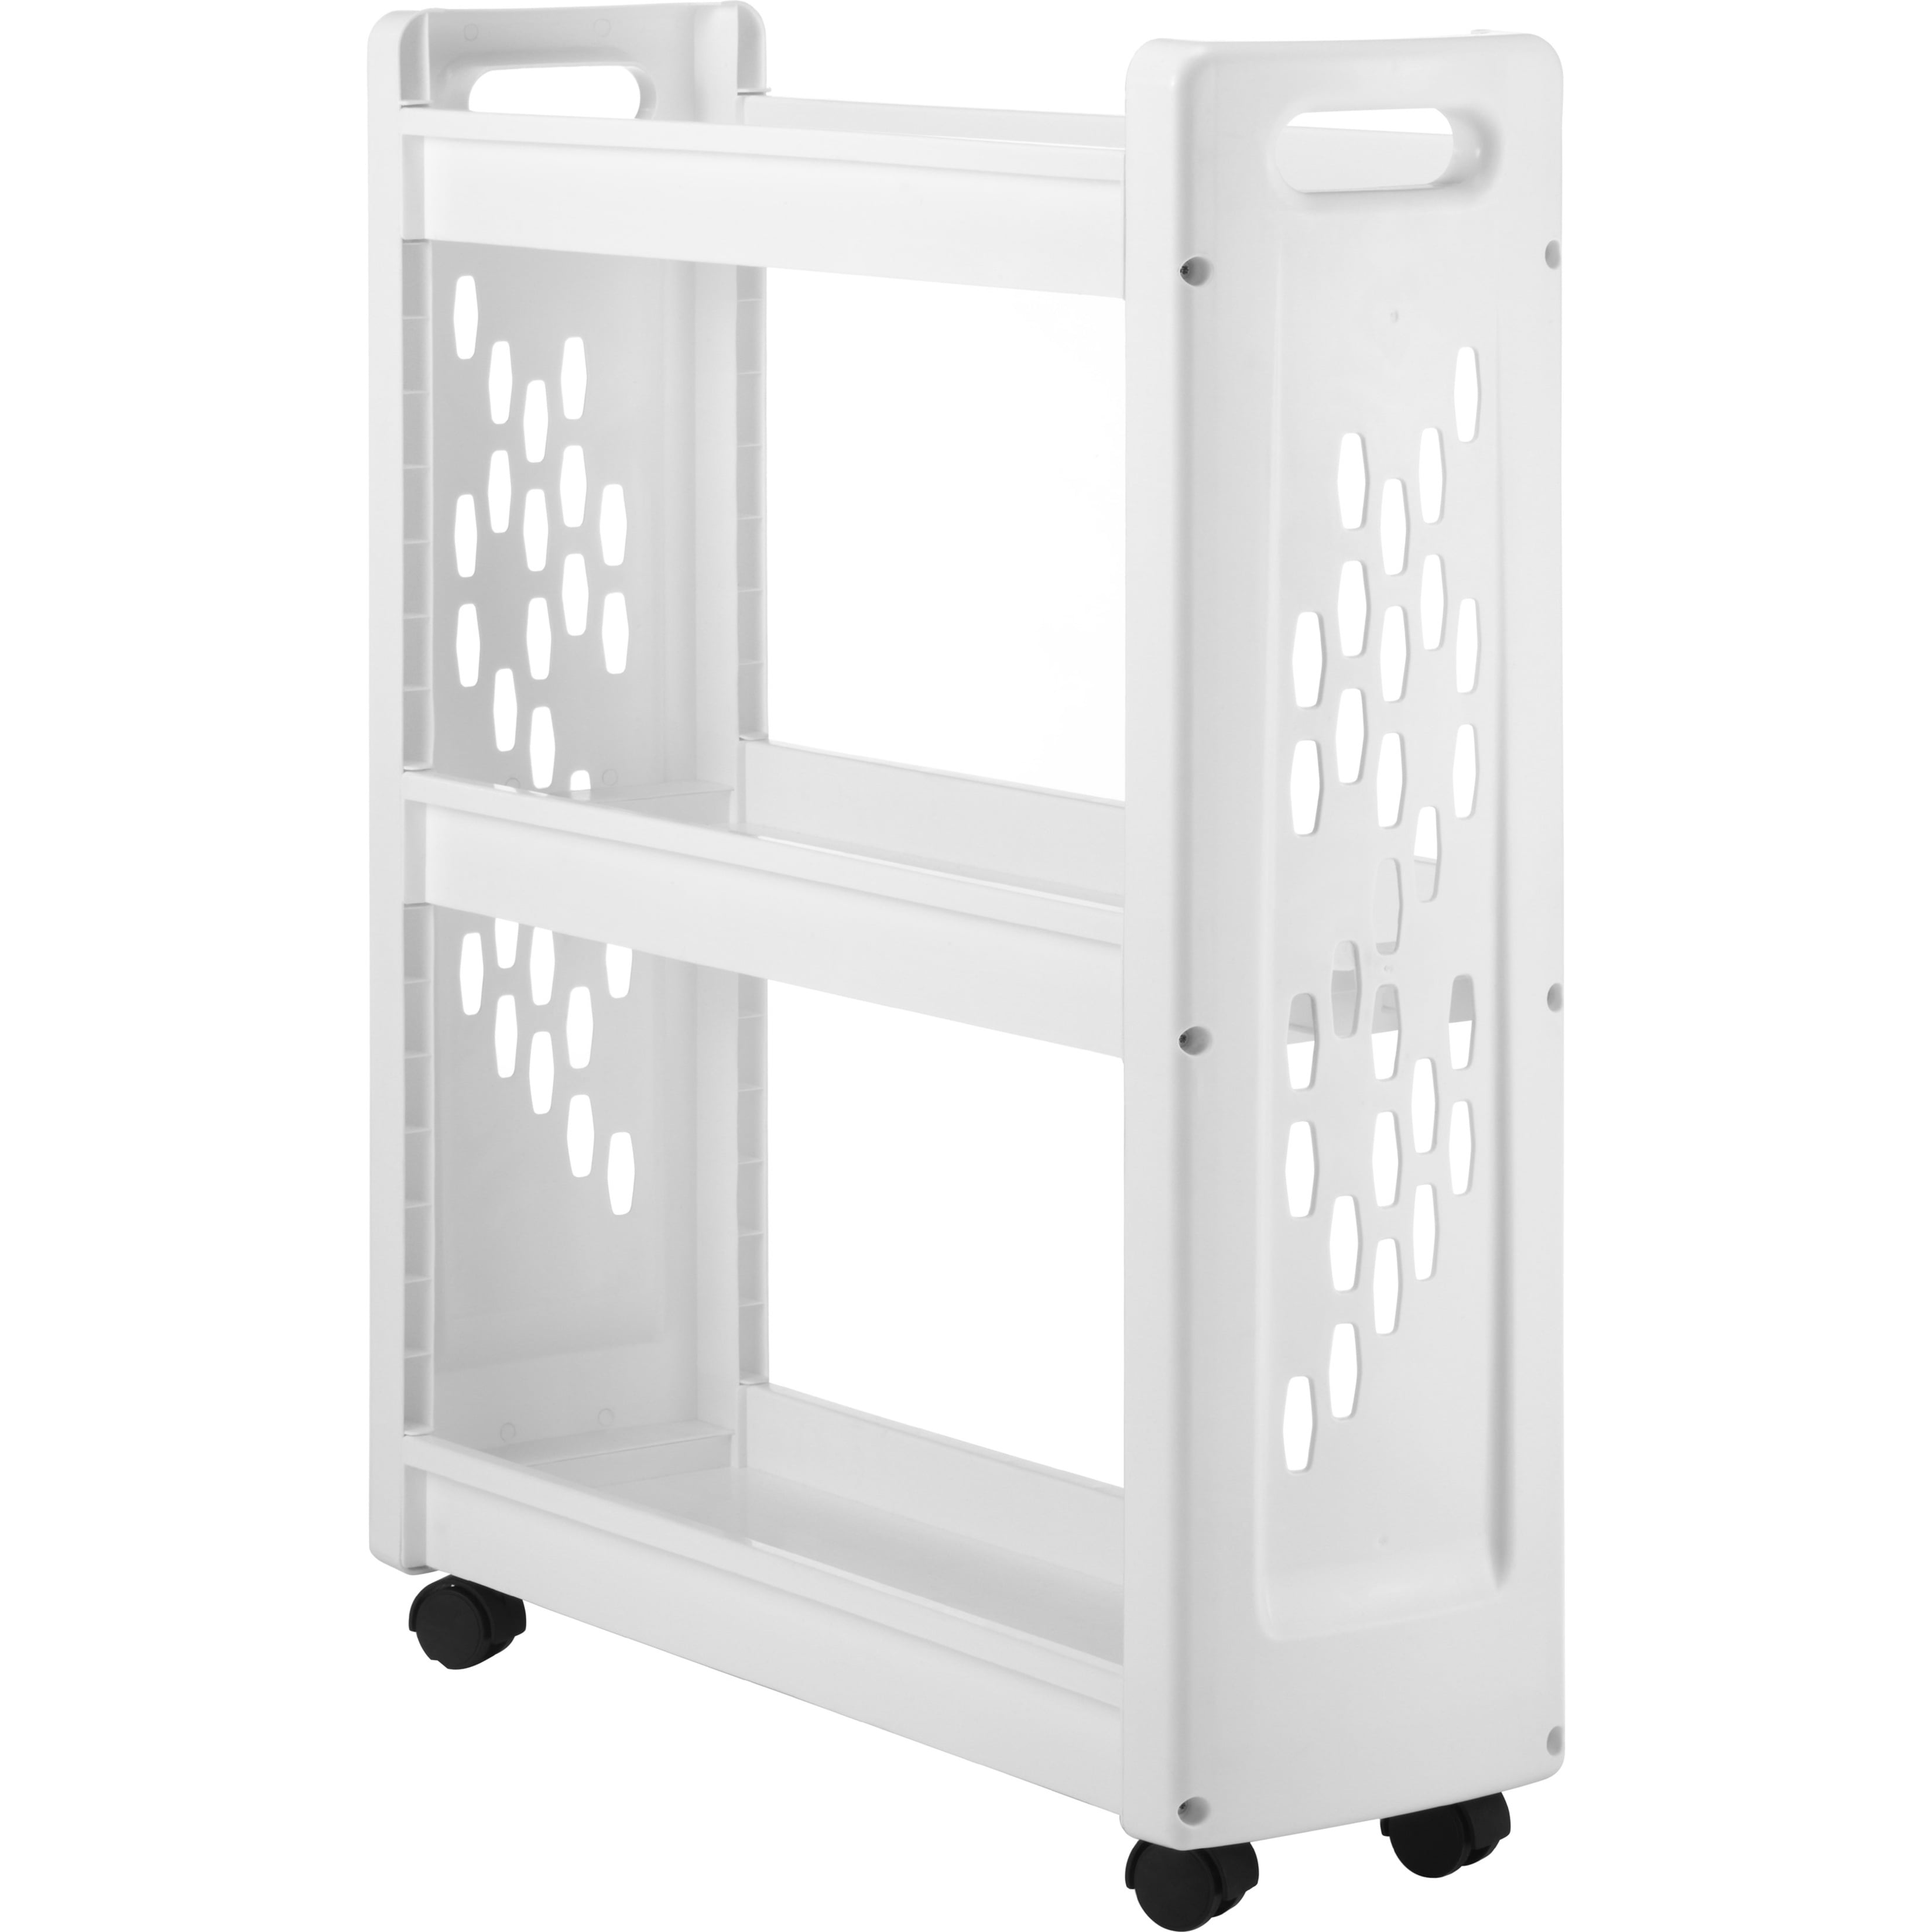 Honey-Can-Do Crt-01149 3-Tier Laundry Cart White 23"L x 8"W x 31"H 